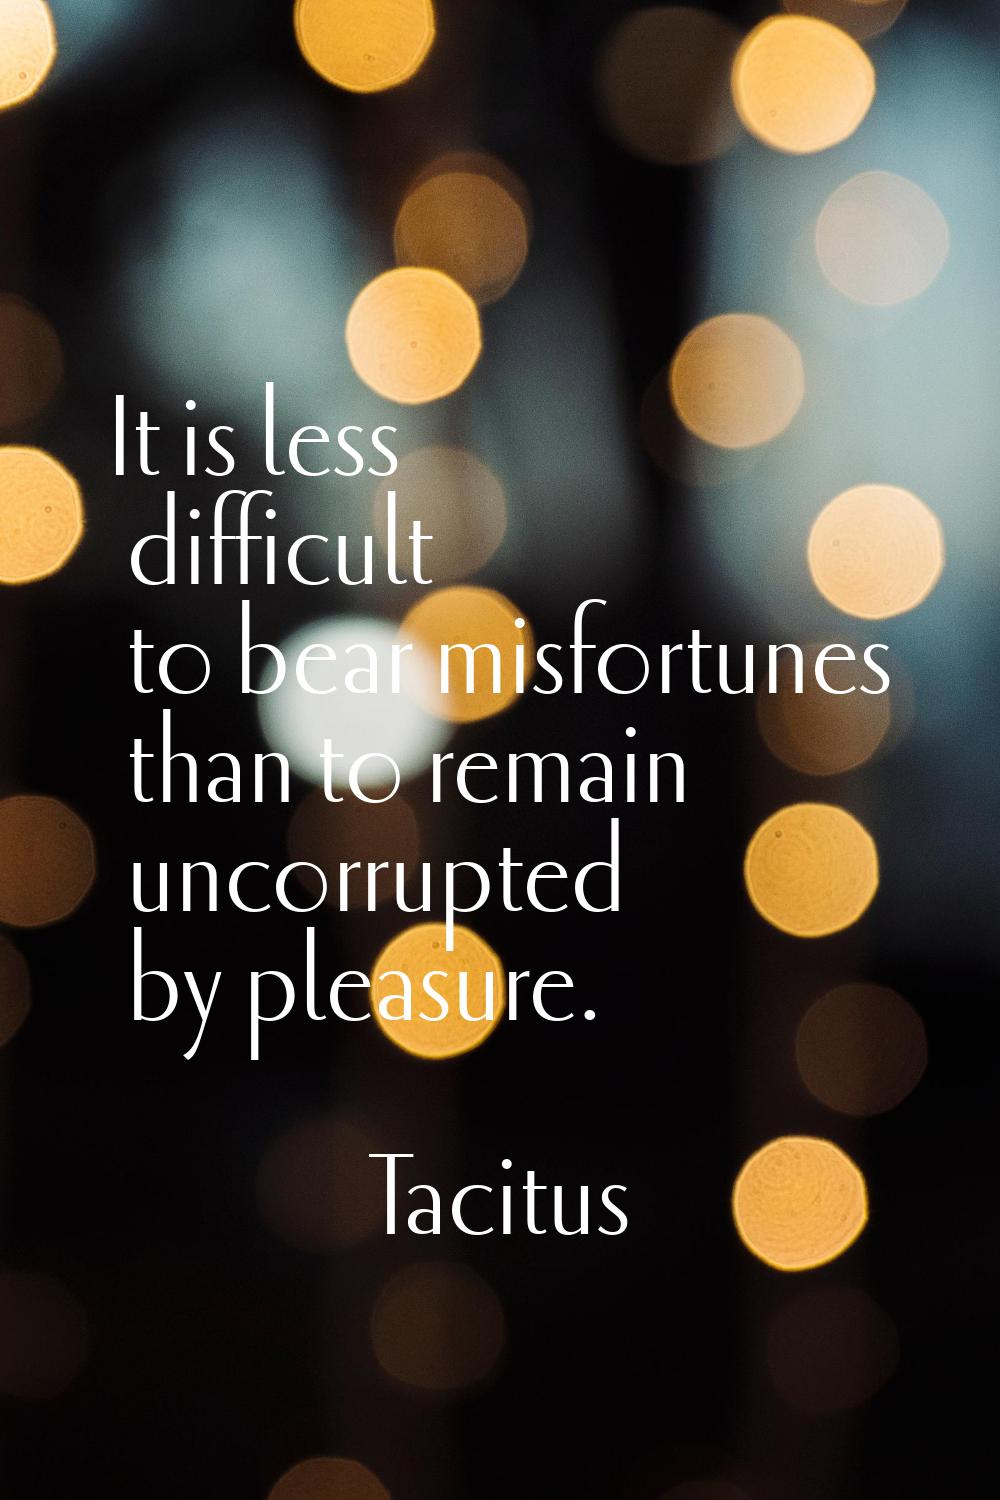 It is less difficult to bear misfortunes than to remain uncorrupted by pleasure.